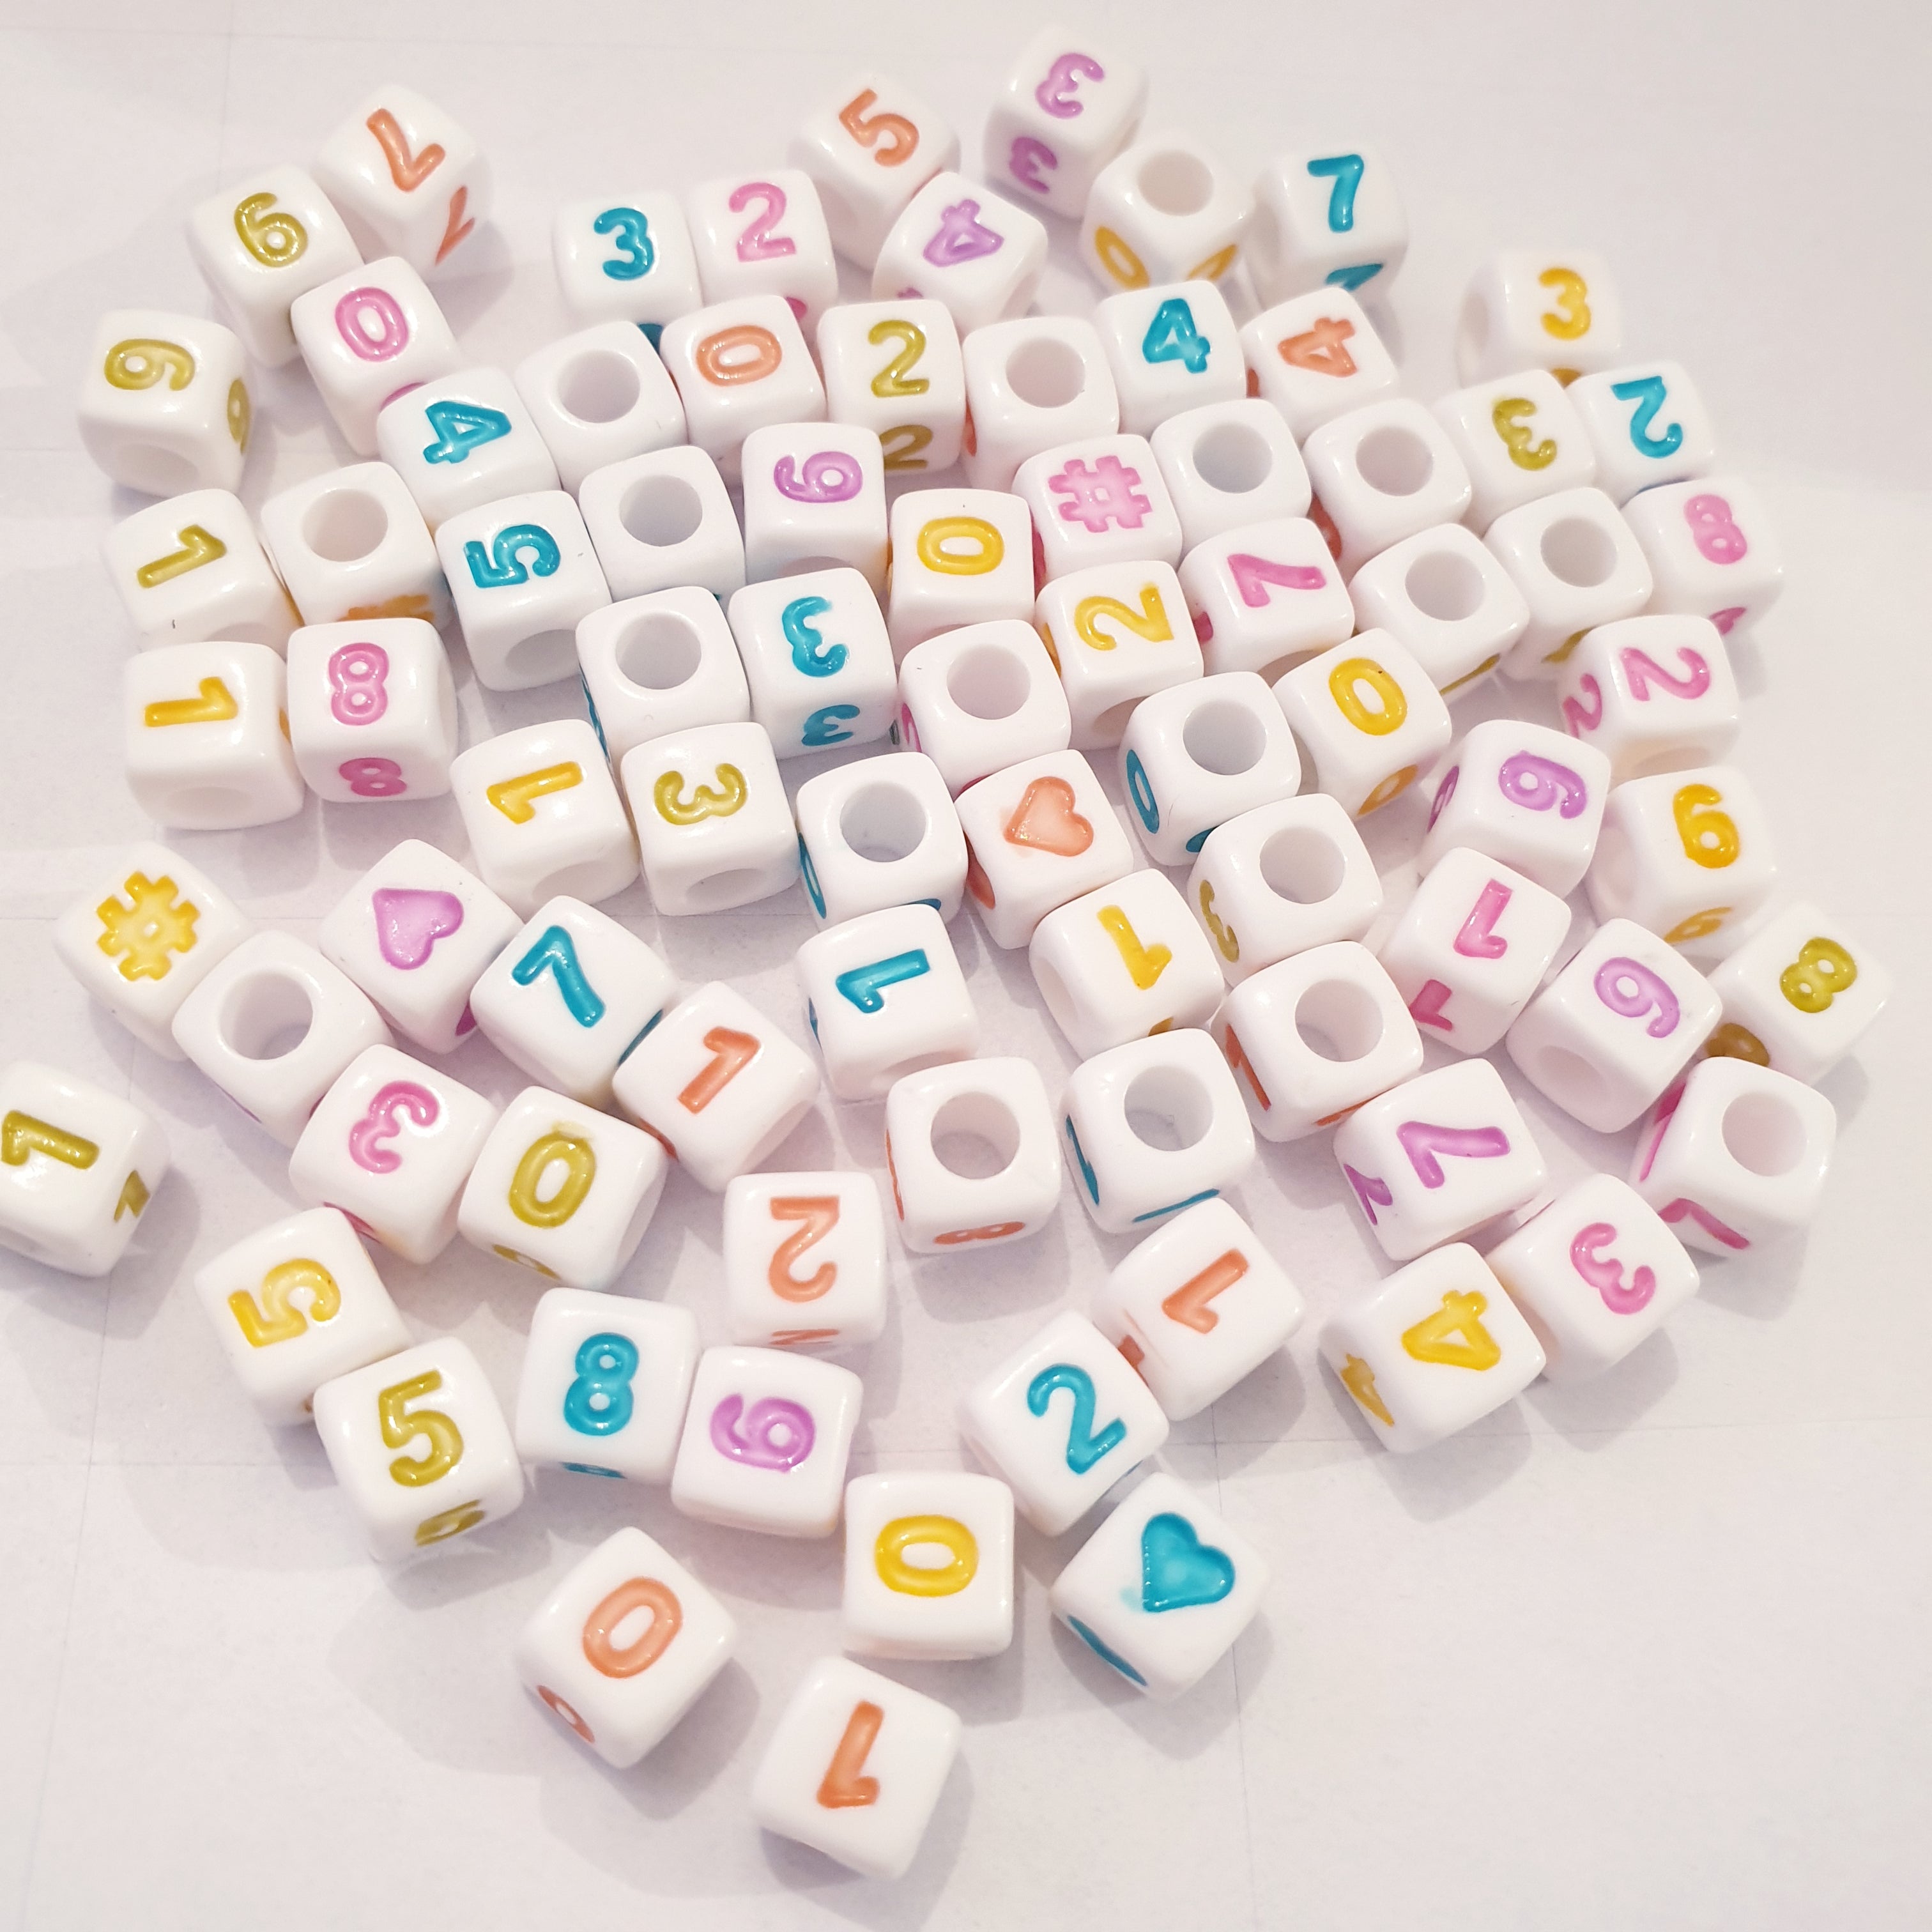 MajorCrafts 200pcs 7mm Cube Colourful Mixed Numbers Acrylic Beads with 4mm Hole Size